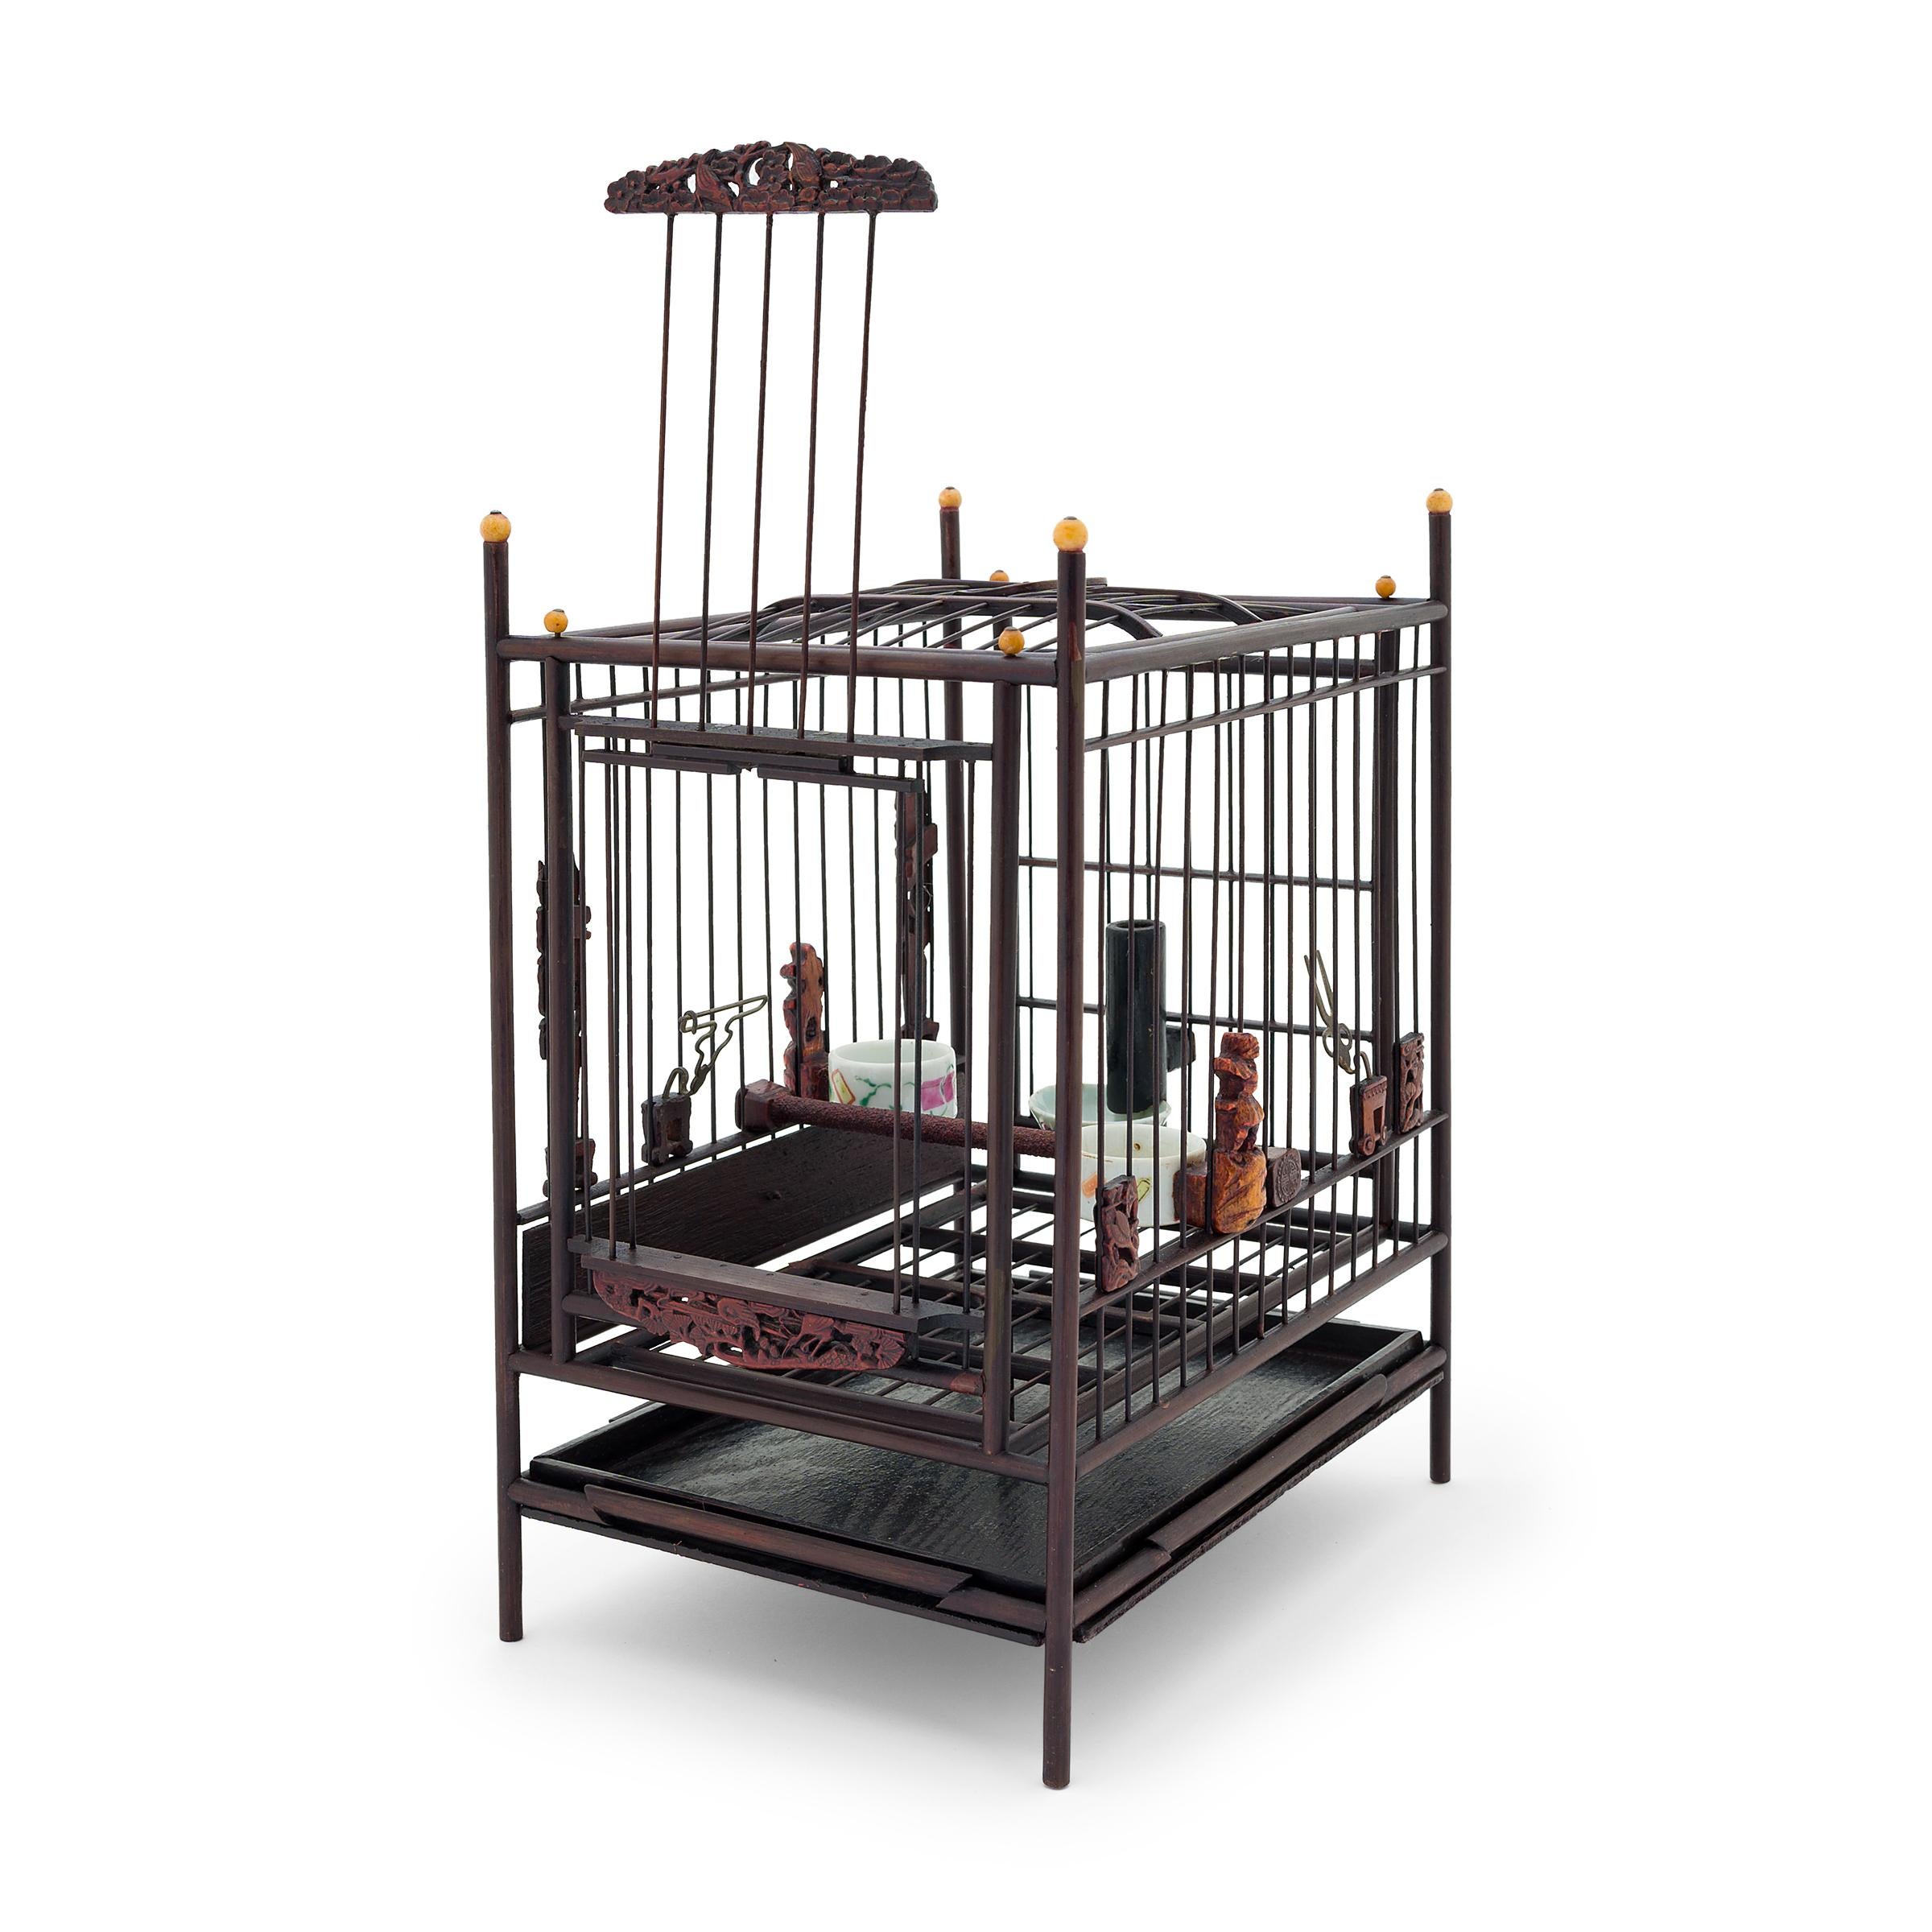 20th Century Chinese Birdcage with Traveling Case, c. 1900